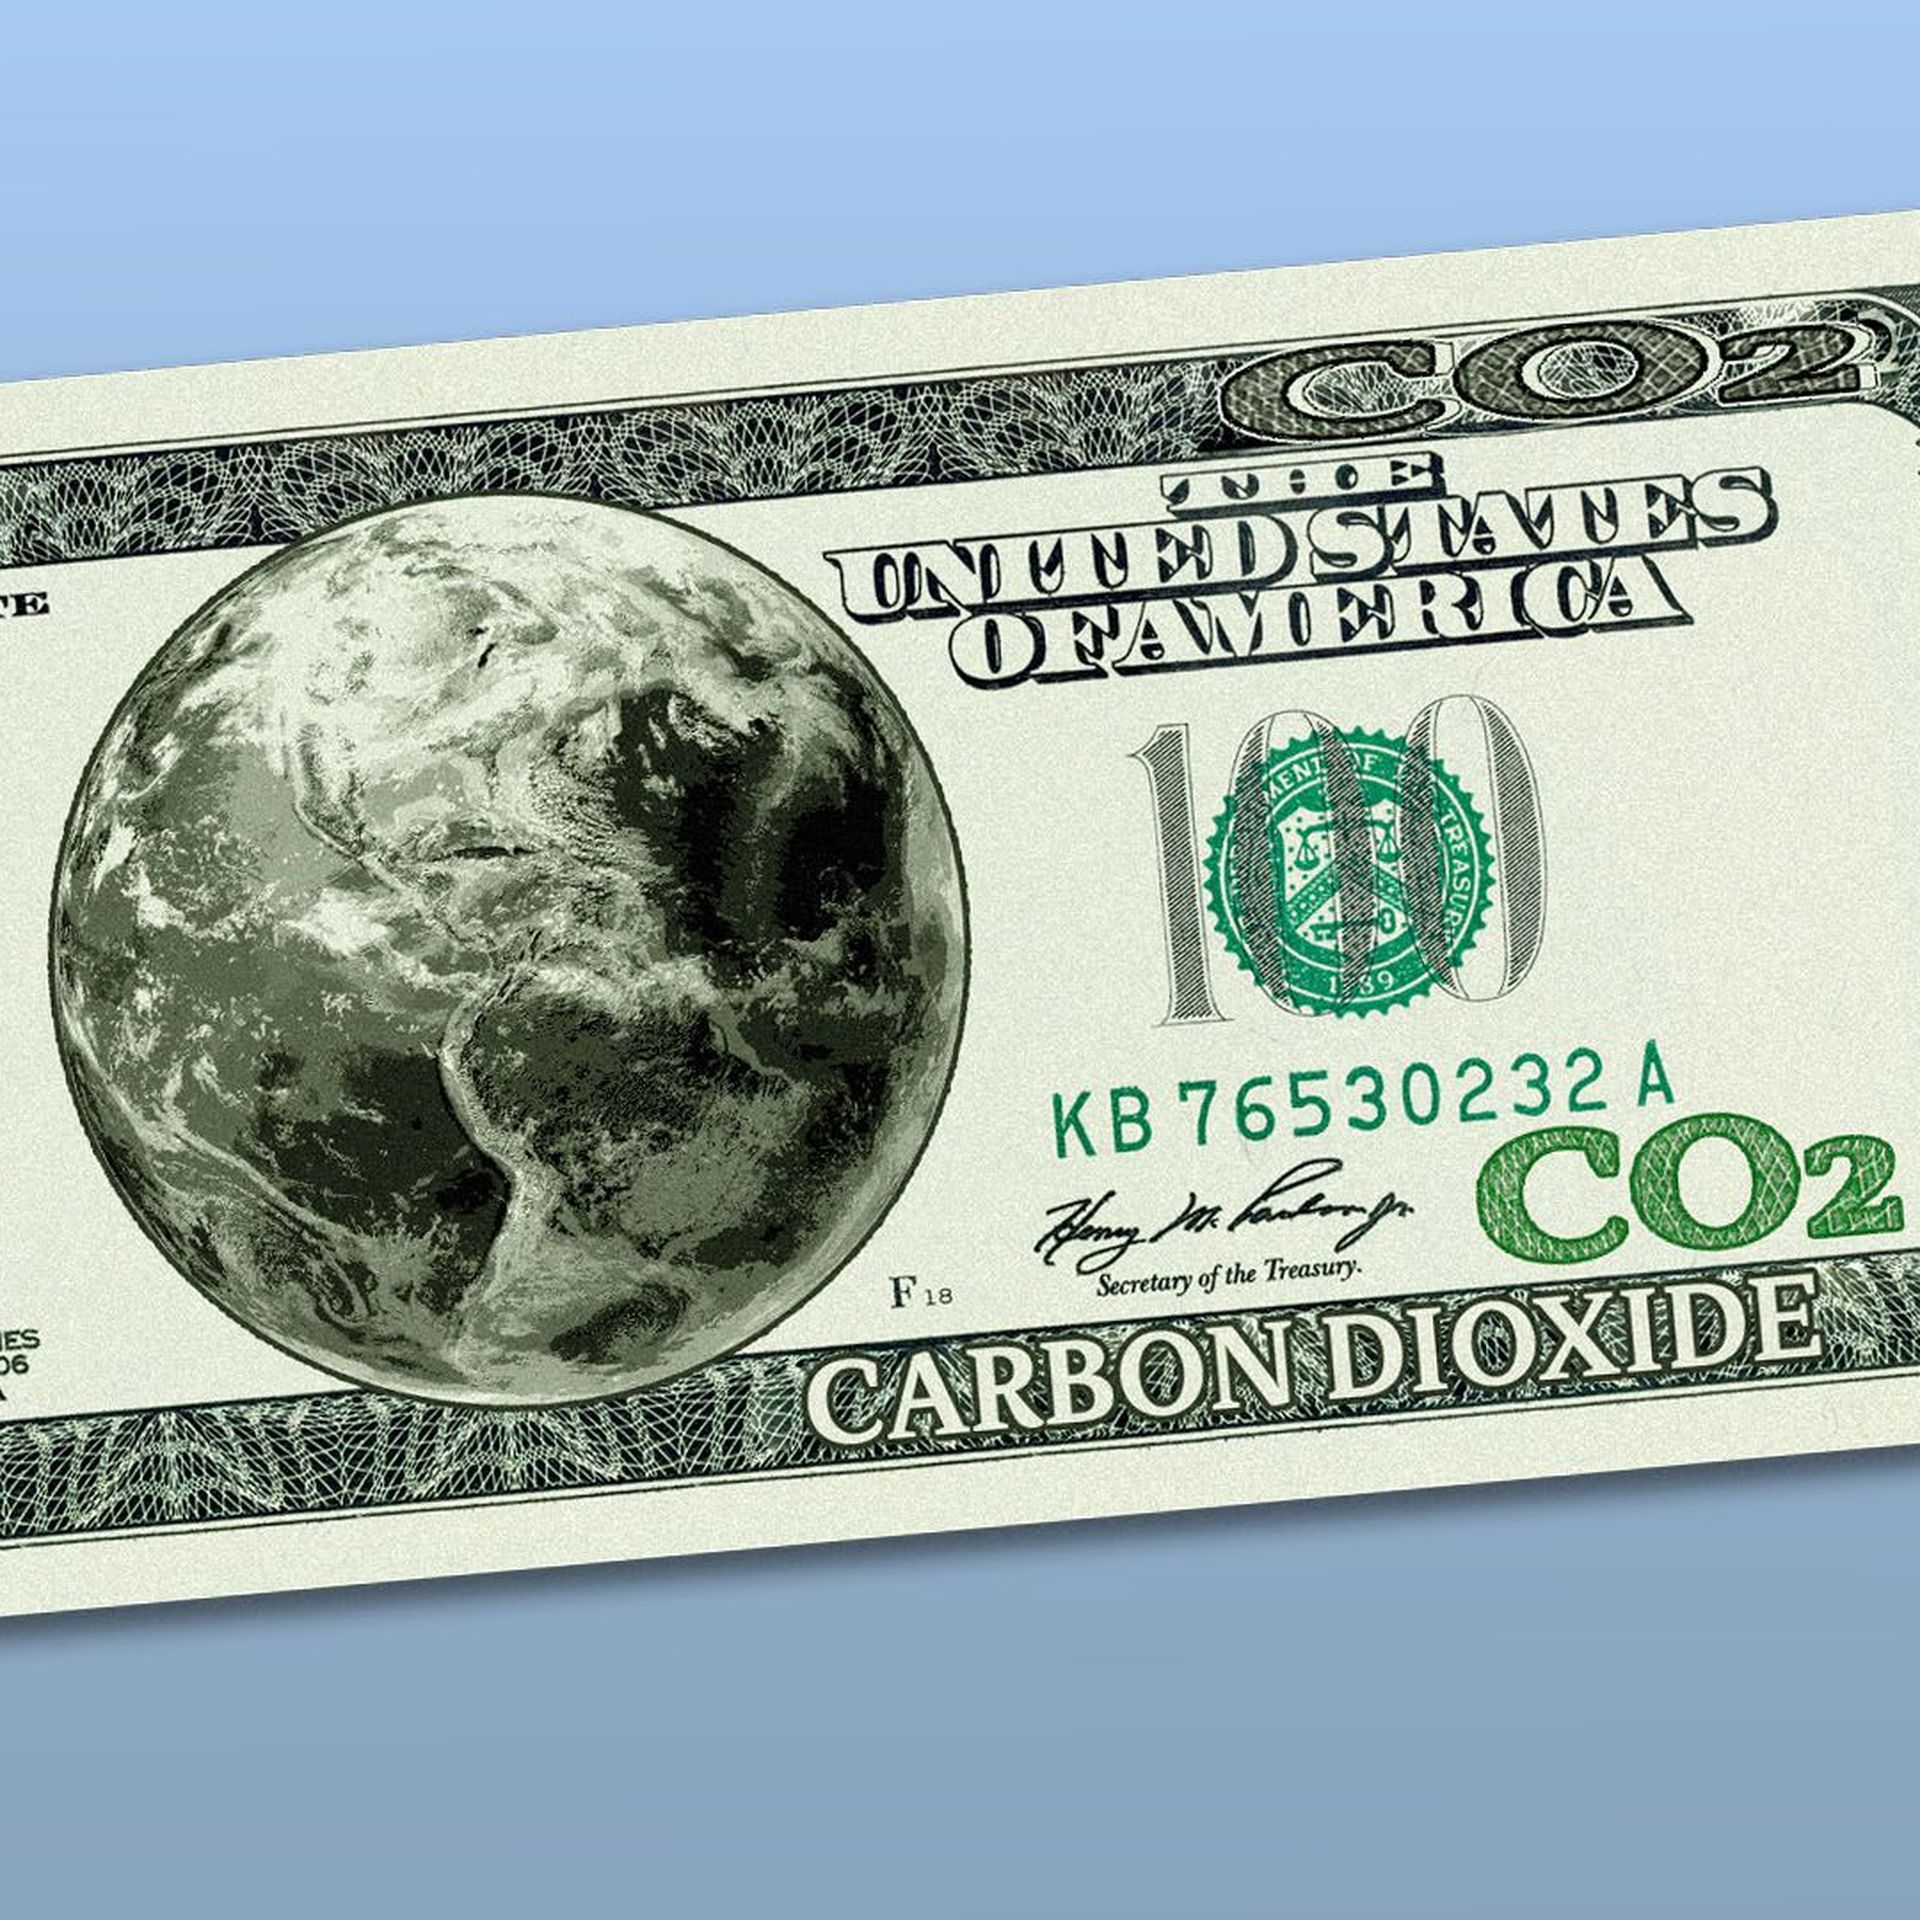 Illustration of a dollar bill that reads "CO2" and has an earth in the middle